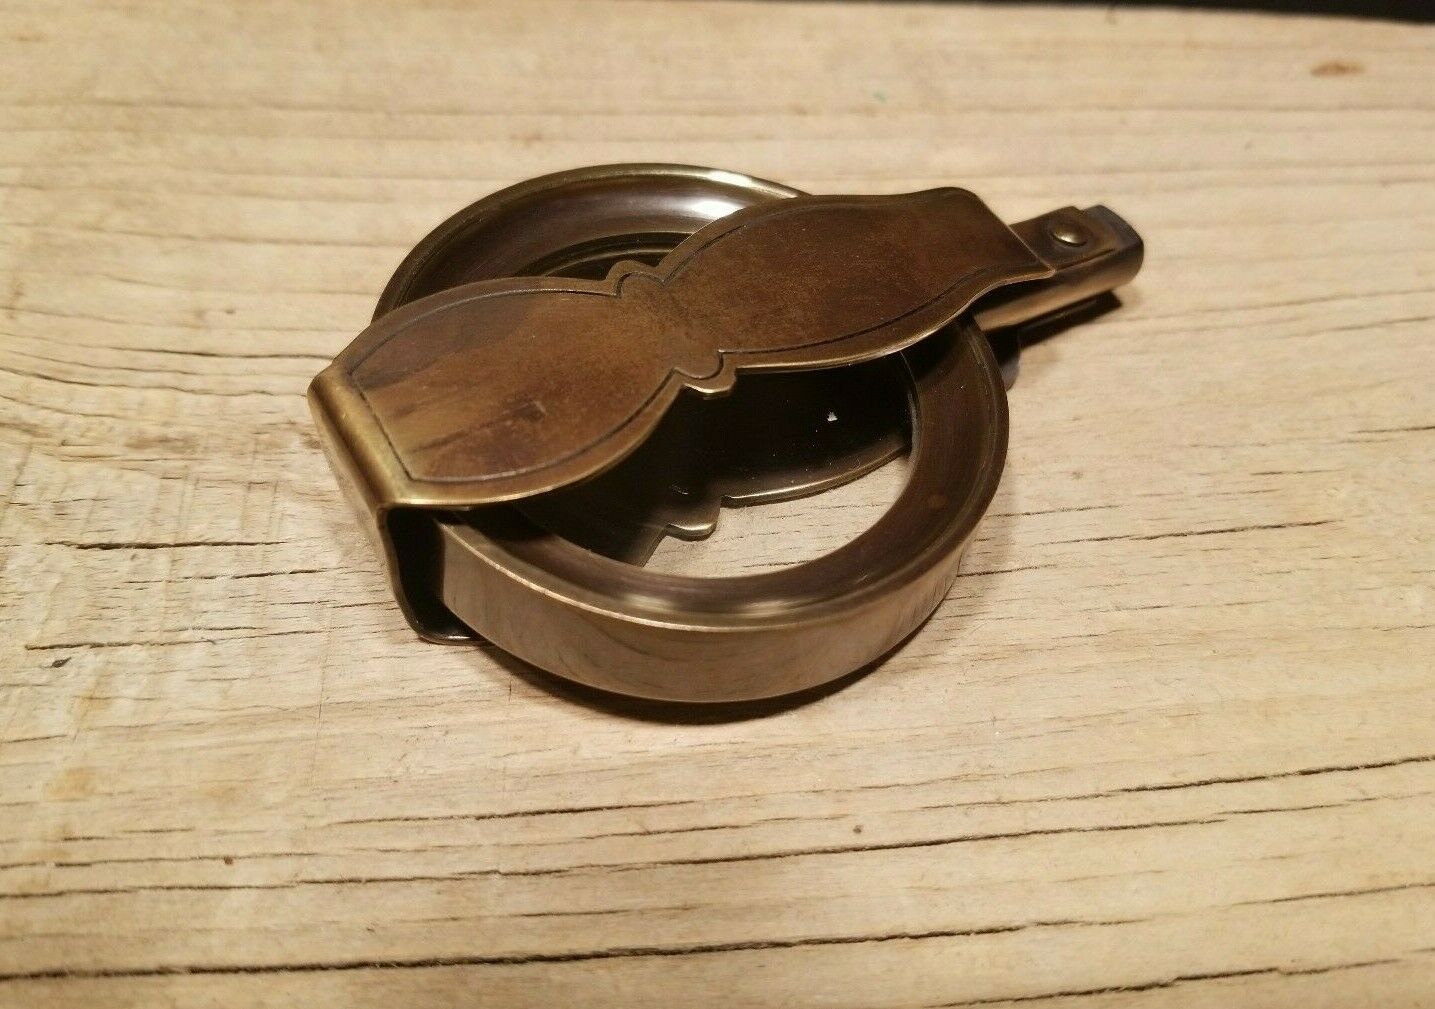 Antique Vintage Style, Brass Pocket Folding Optical Glass Magnifying Lens Loupe - Early Home Decor